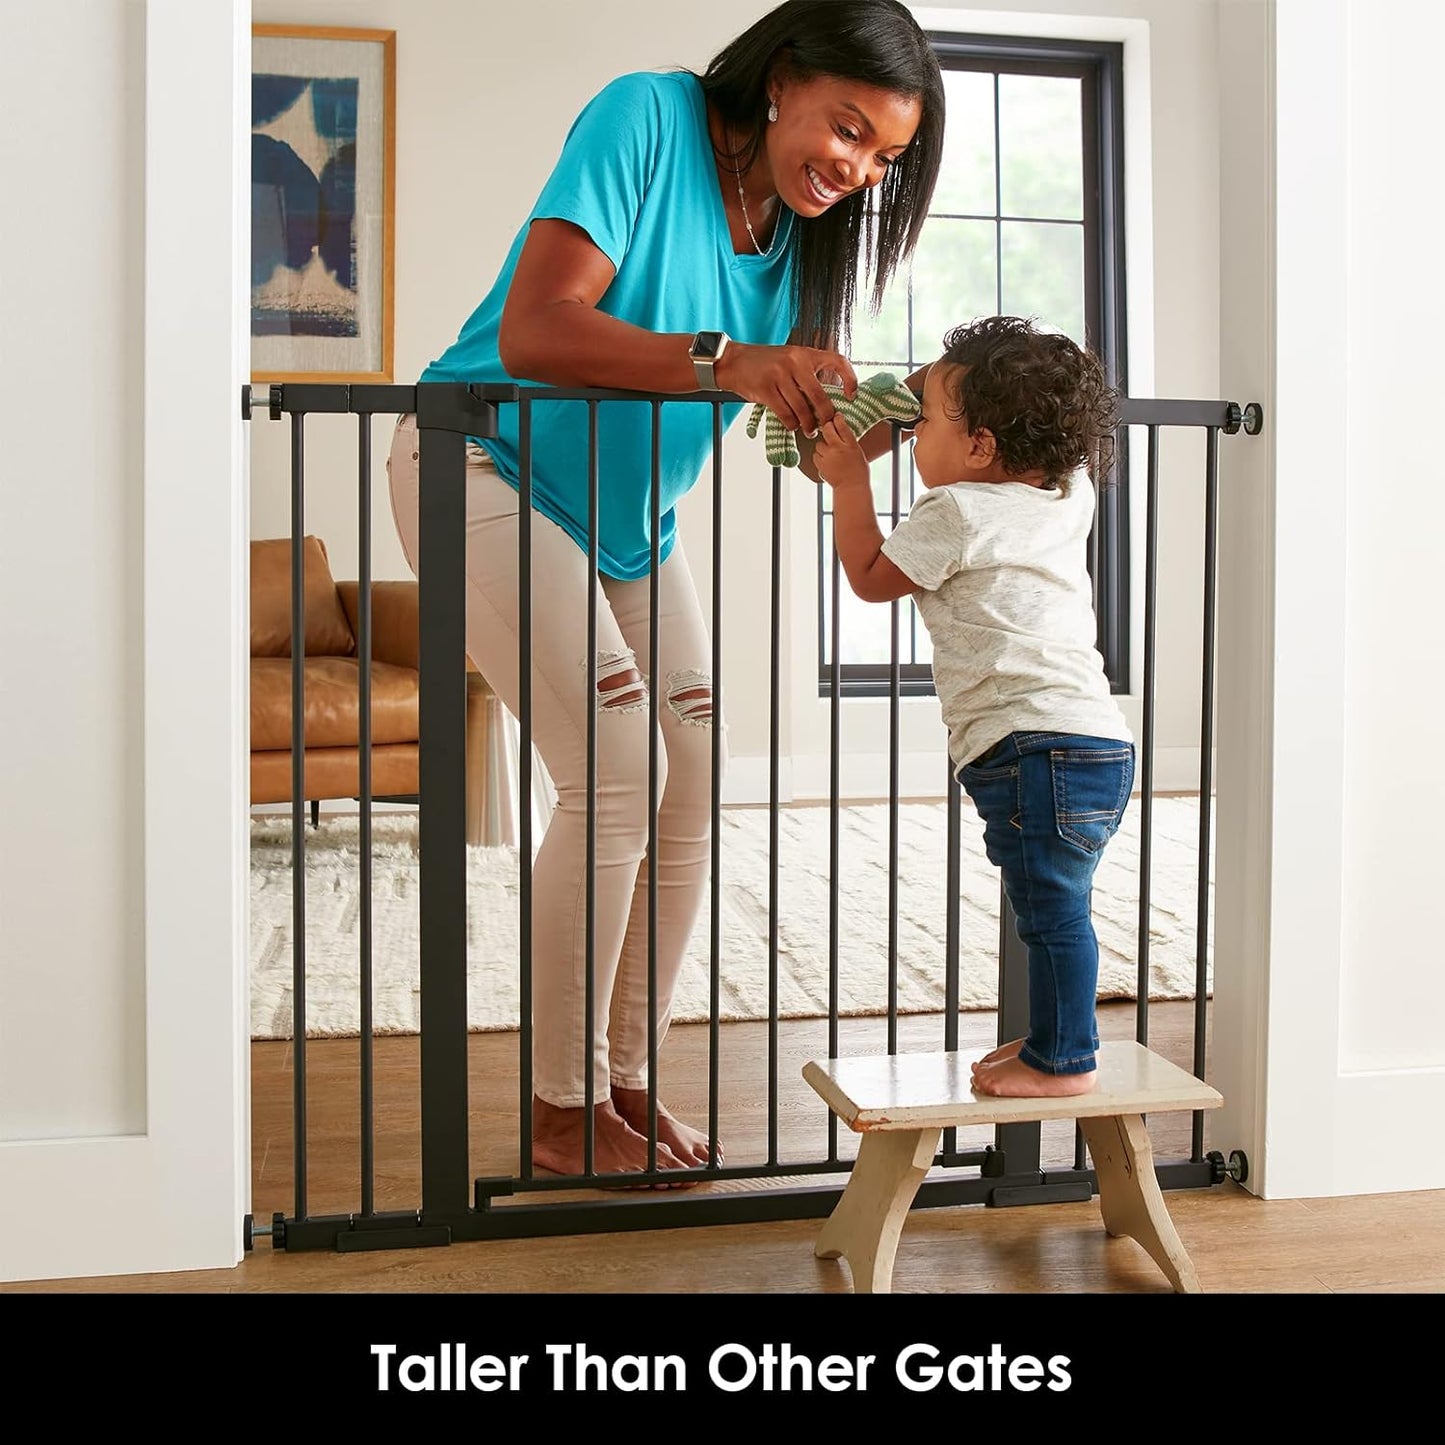 Cumbor 29.7-46" Baby Gate for Stairs, Mom's Choice Awards Winner-Auto Close Dog Gate for the House, Easy Install Pressure Mounted Pet Gates for Doorways, Easy Walk Thru Wide Safety Gate for Dog, Black